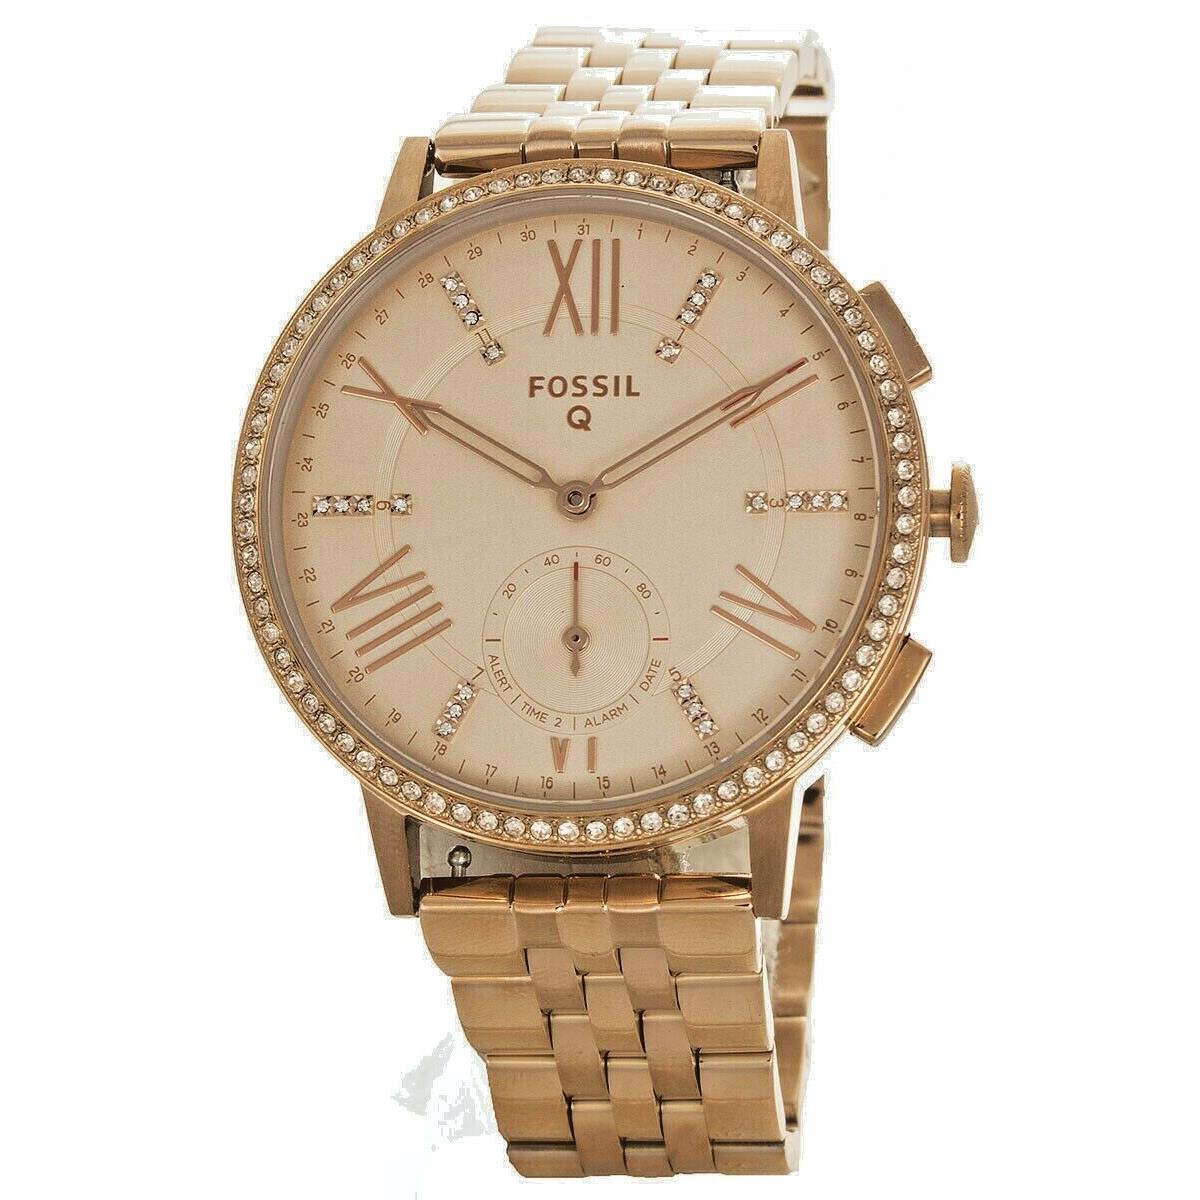 Fossil Q Hybrid Virginia Rose Gold-tone Stainless Steel Smartwatch FTW1106